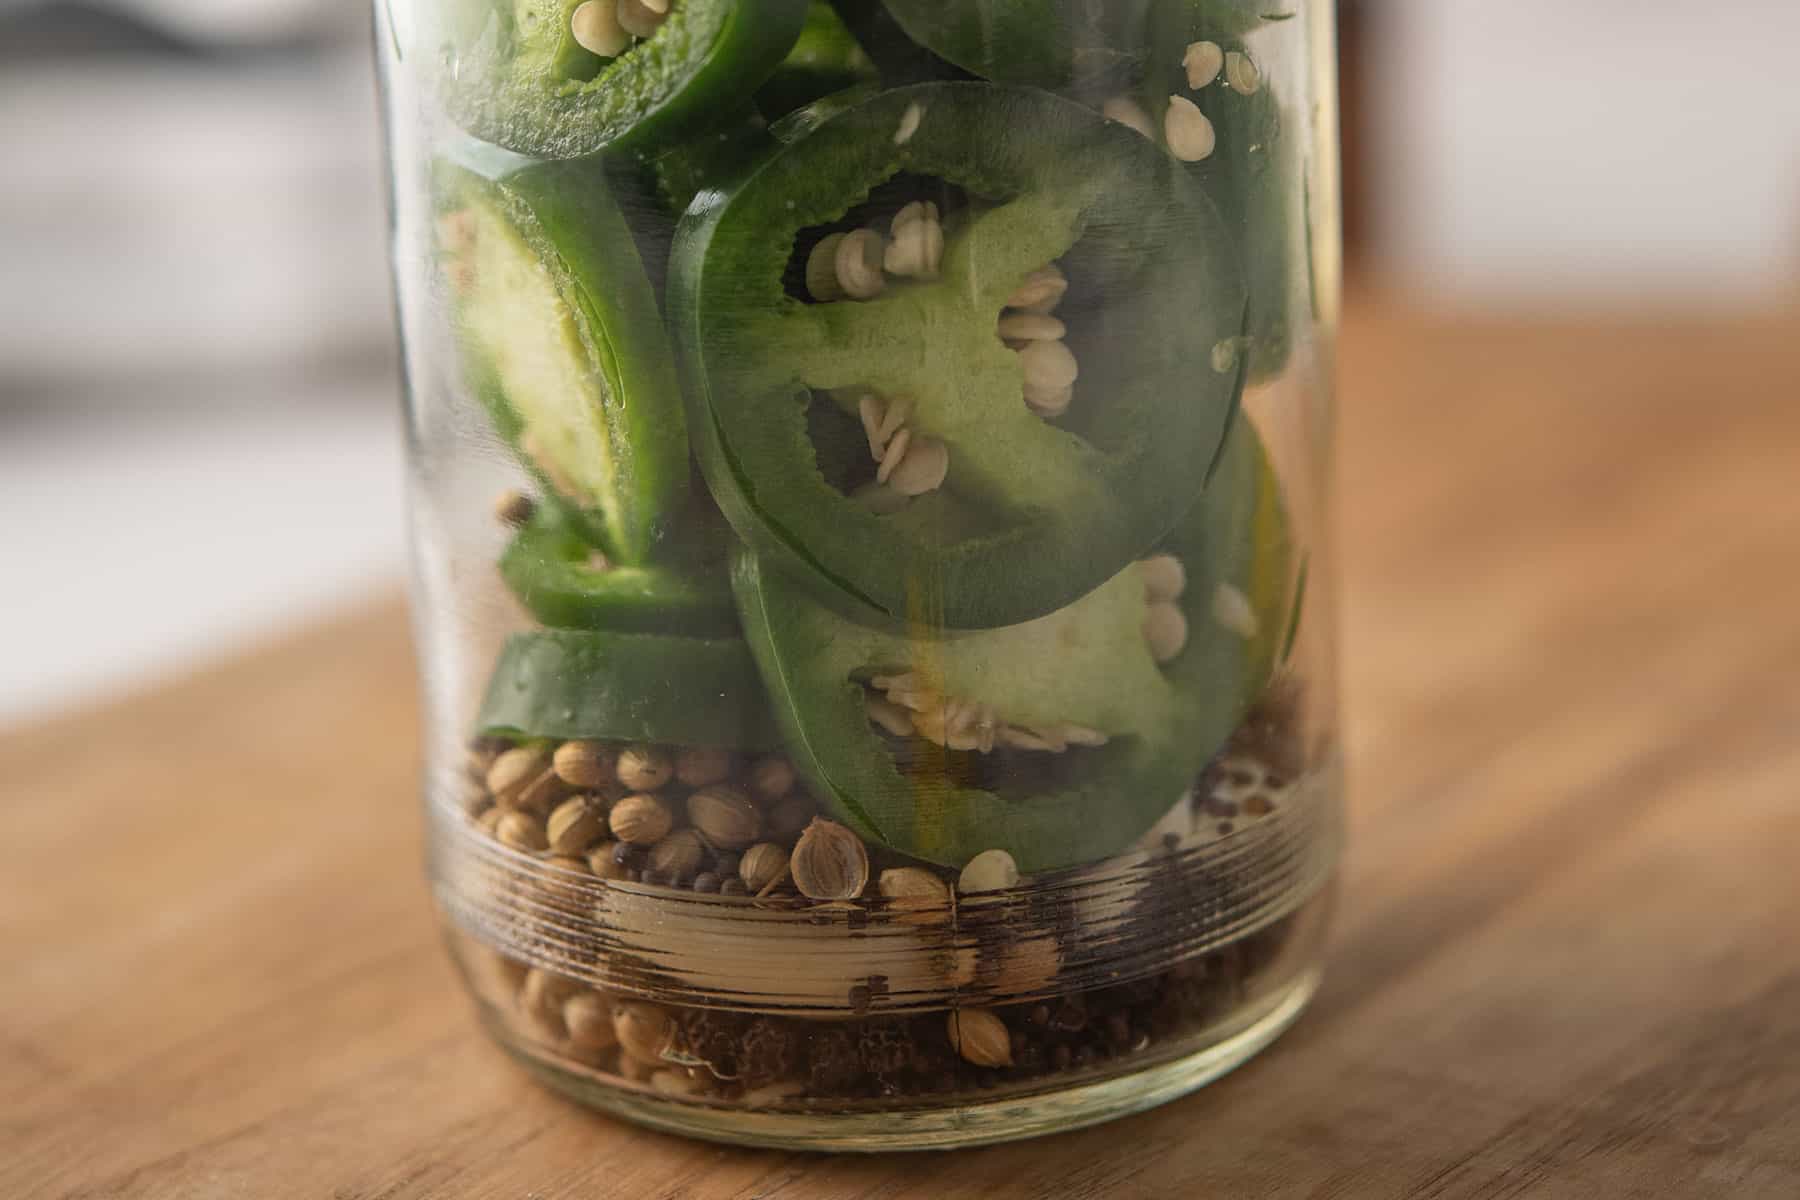 jalapeno sliced packed in a glass jar for pickling